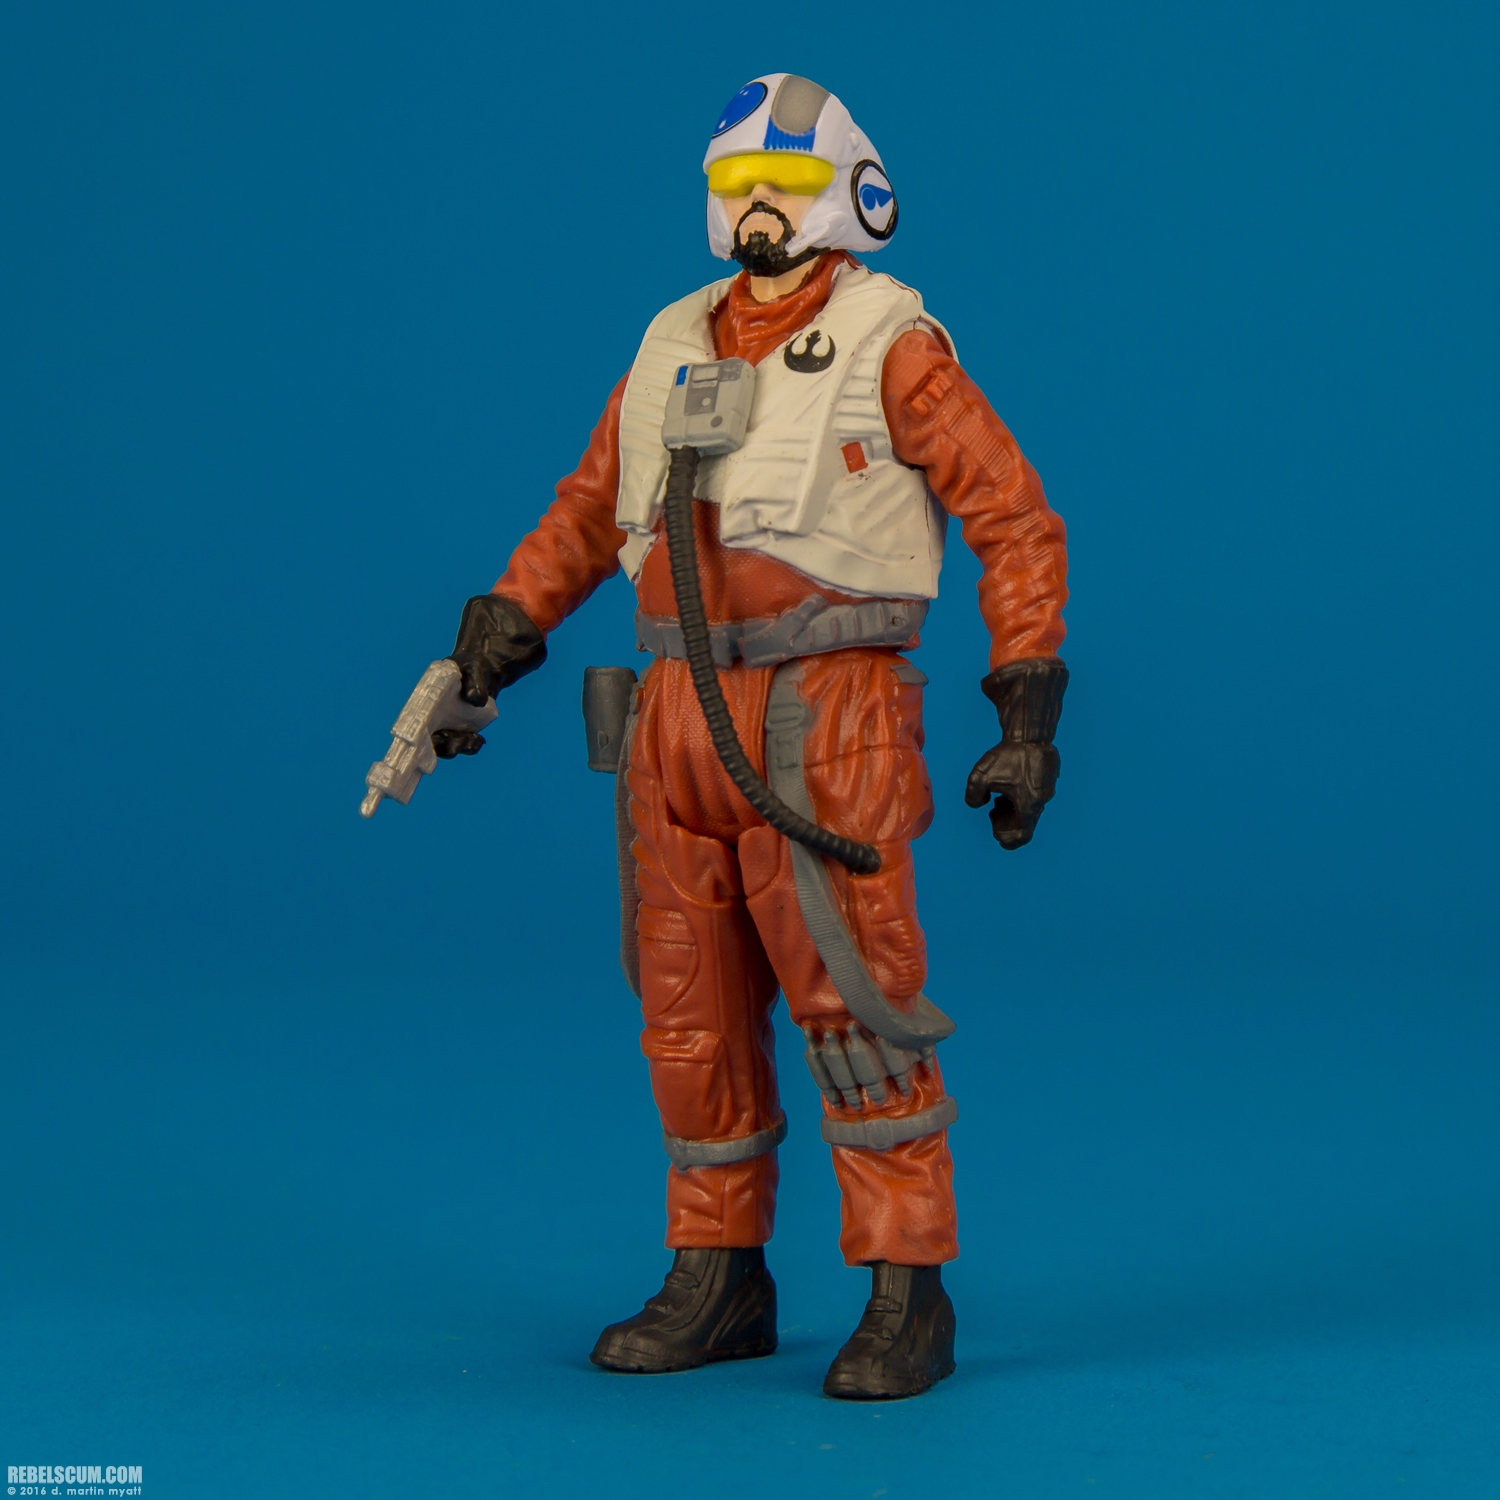 First-Order-Snowtrooper-Officer-Snap-Wexley-The-Force-Awakens-016.jpg